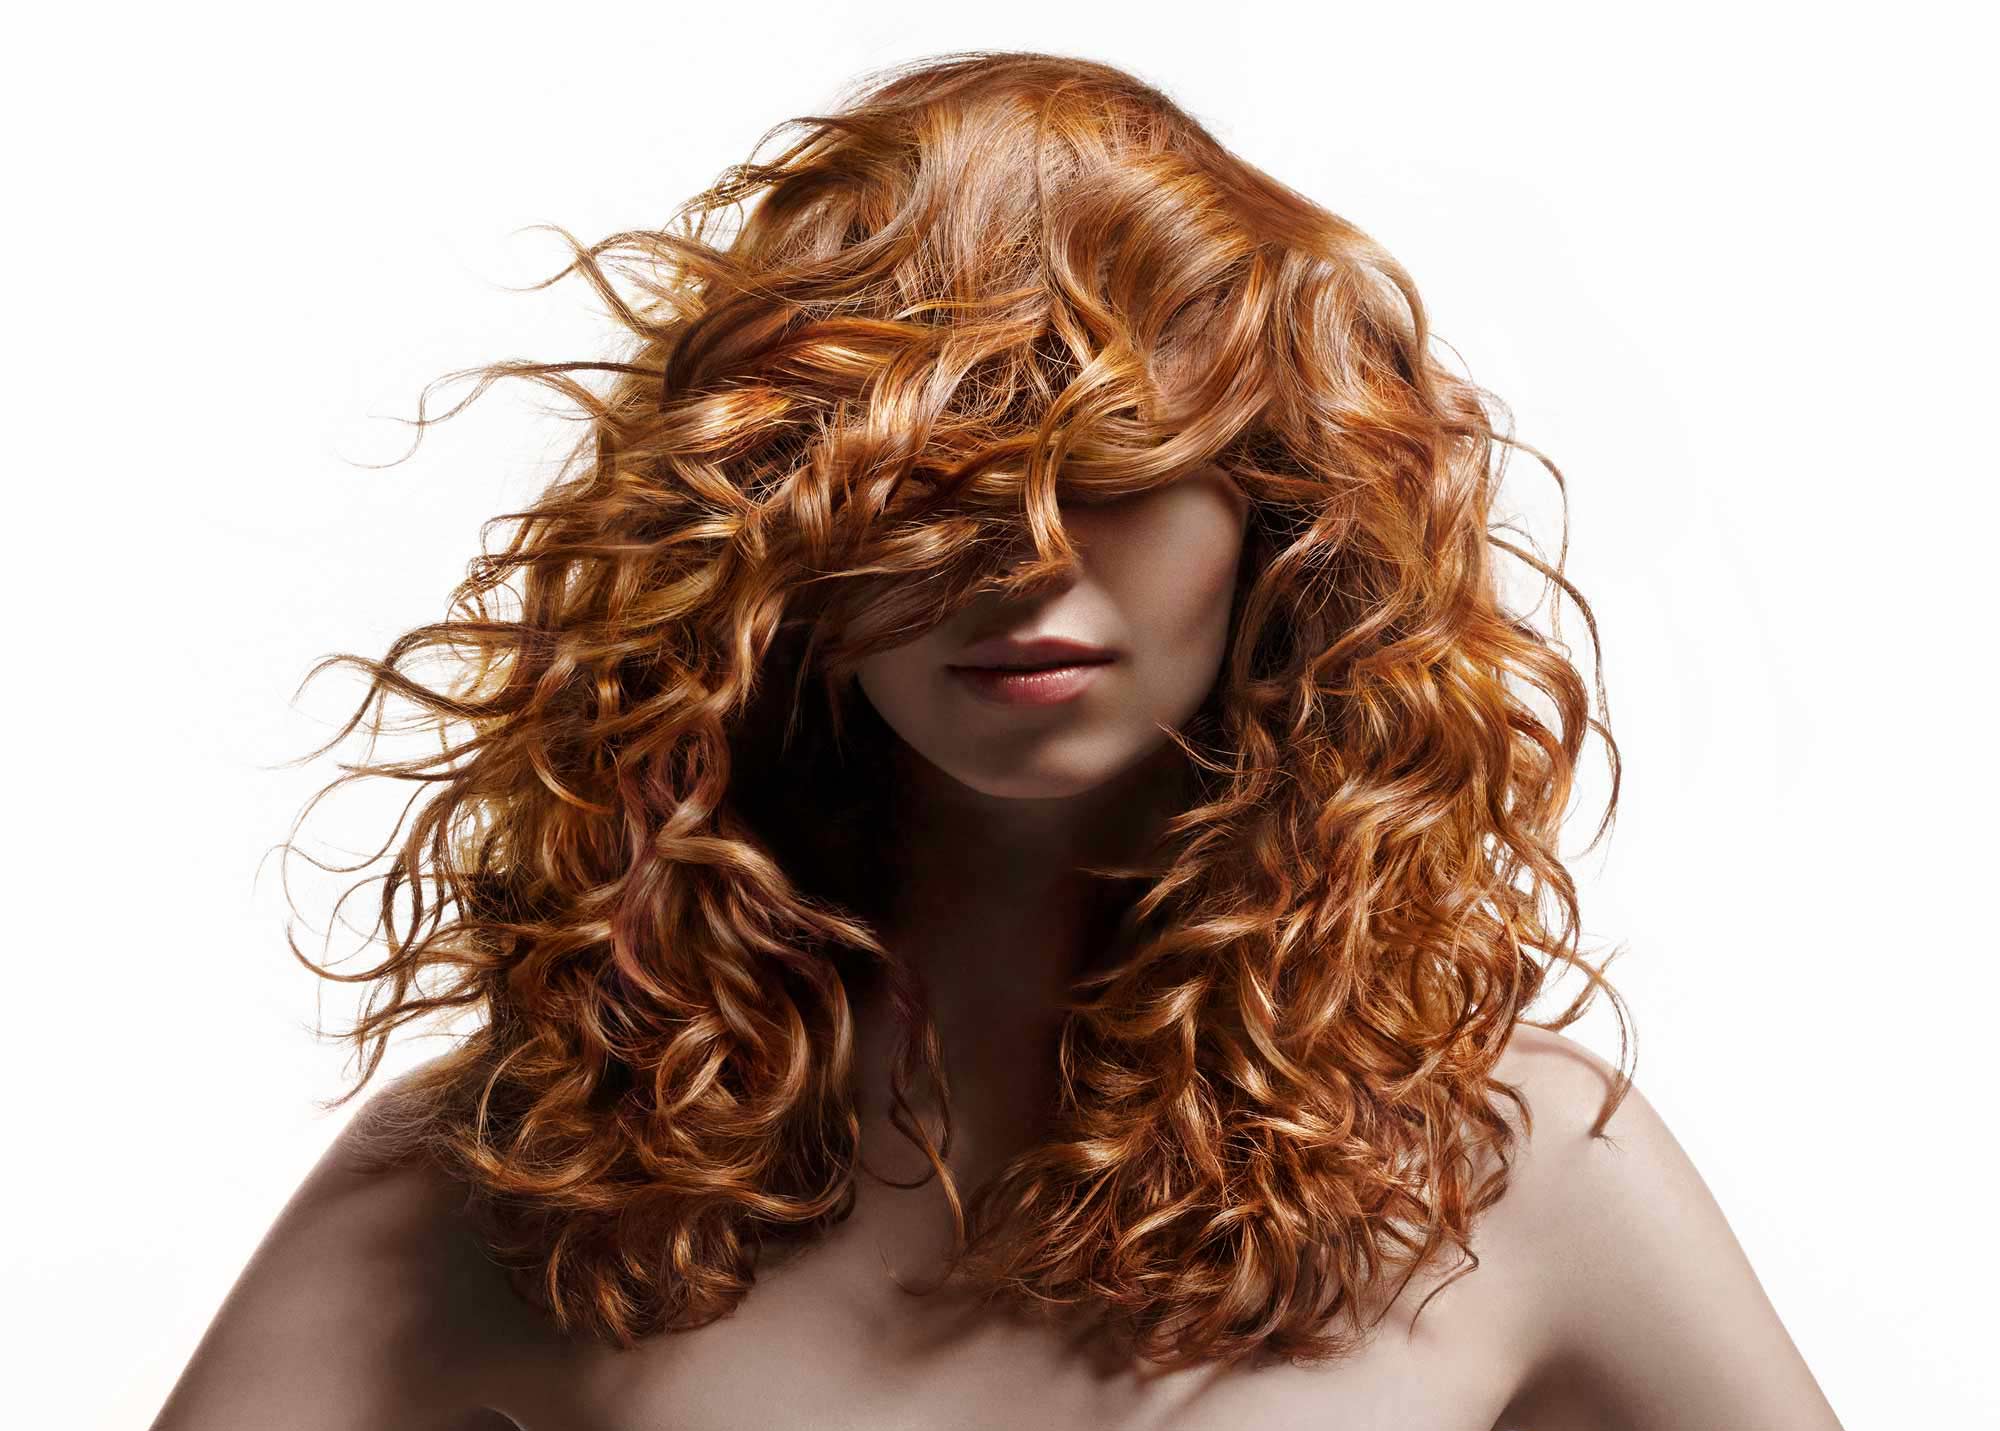 model with gorgeous red curly hair covering her eyes and shoulders